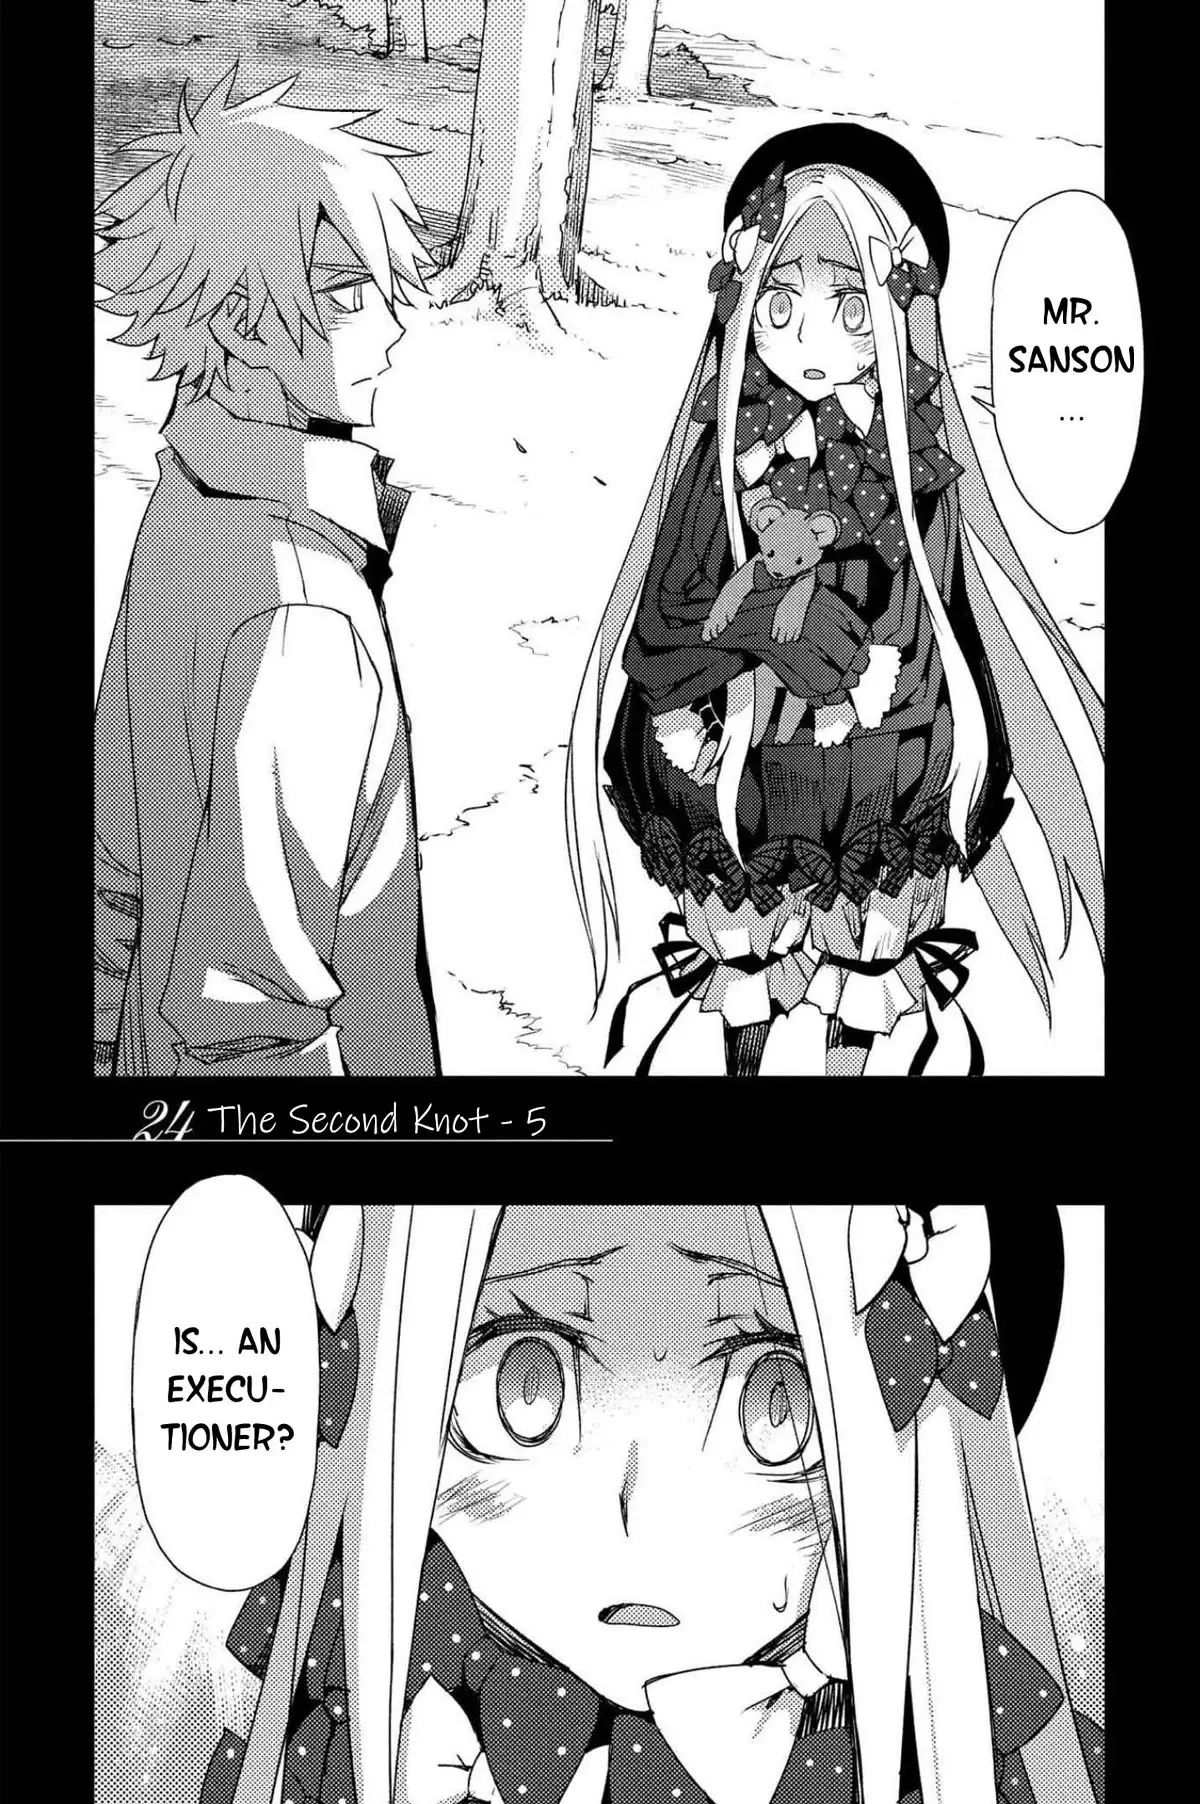 Fate/grand Order: Epic Of Remnant - Subspecies Singularity Iv: Taboo Advent Salem: Salem Of Heresy - 24 page 1-b2f6e181